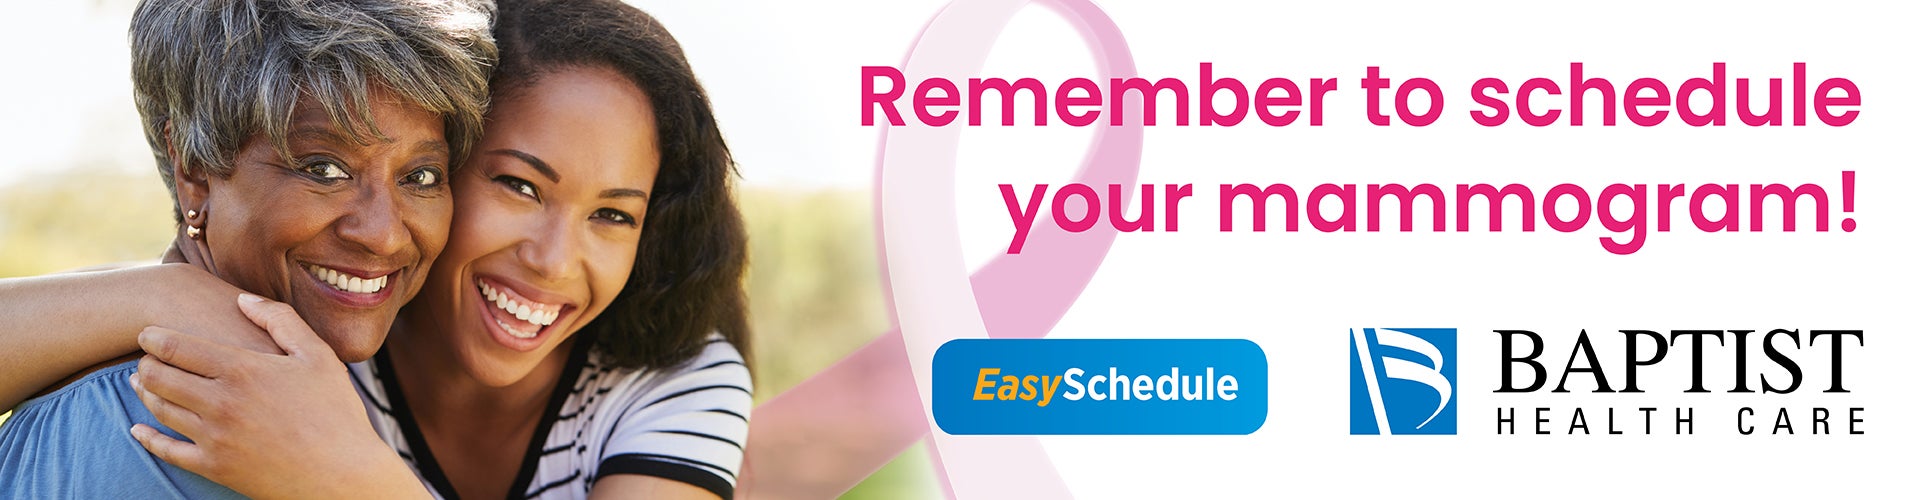 Mother and daughter hugging and smiling with text on image saying Remember to schedule your mammogram!